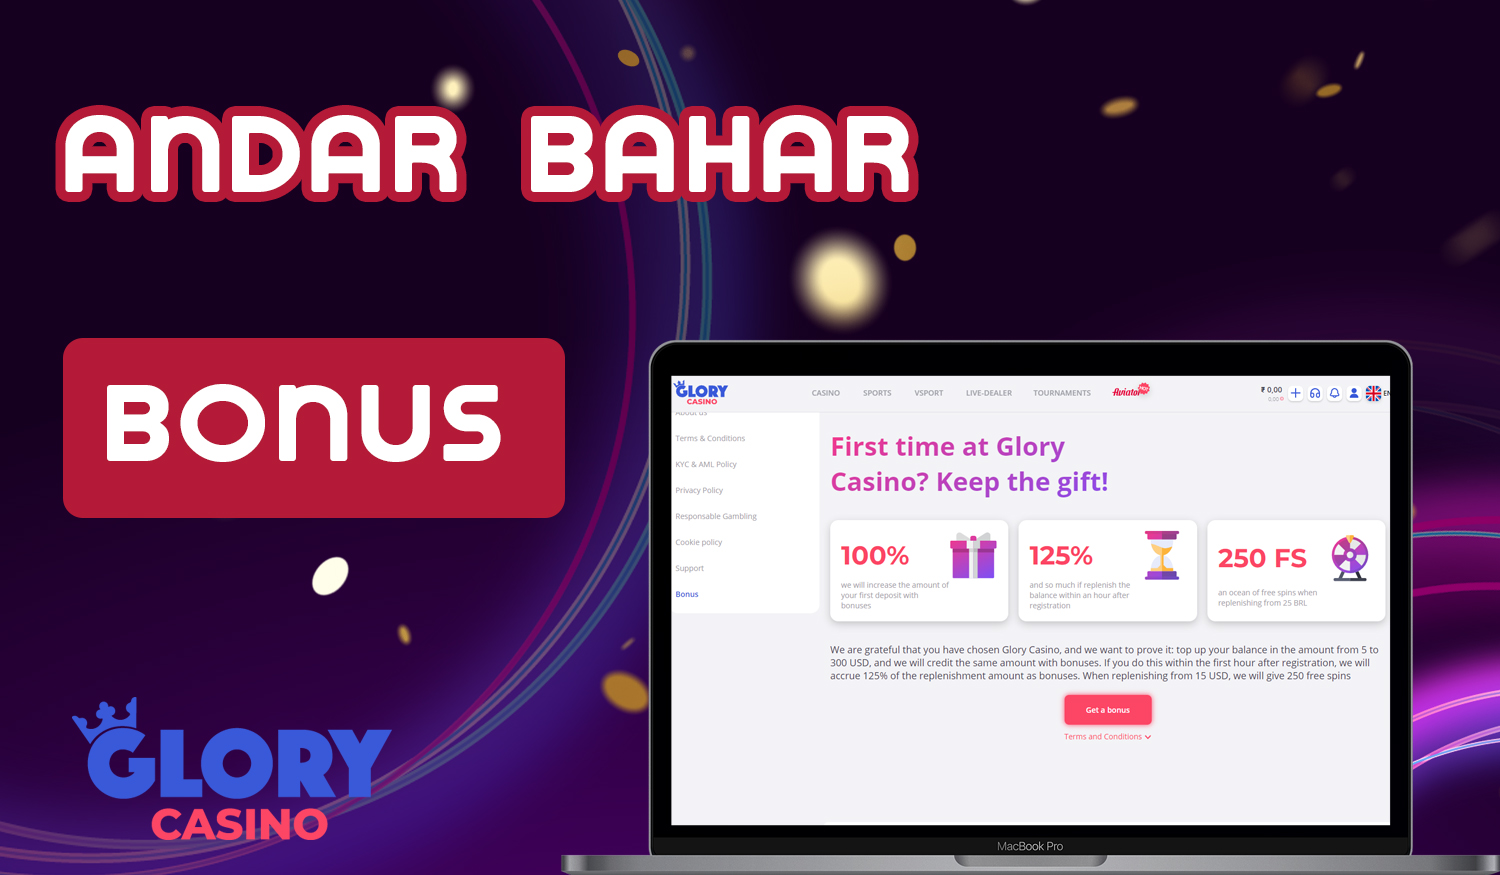 Glory casino bonuses that can be received at registration or after registration